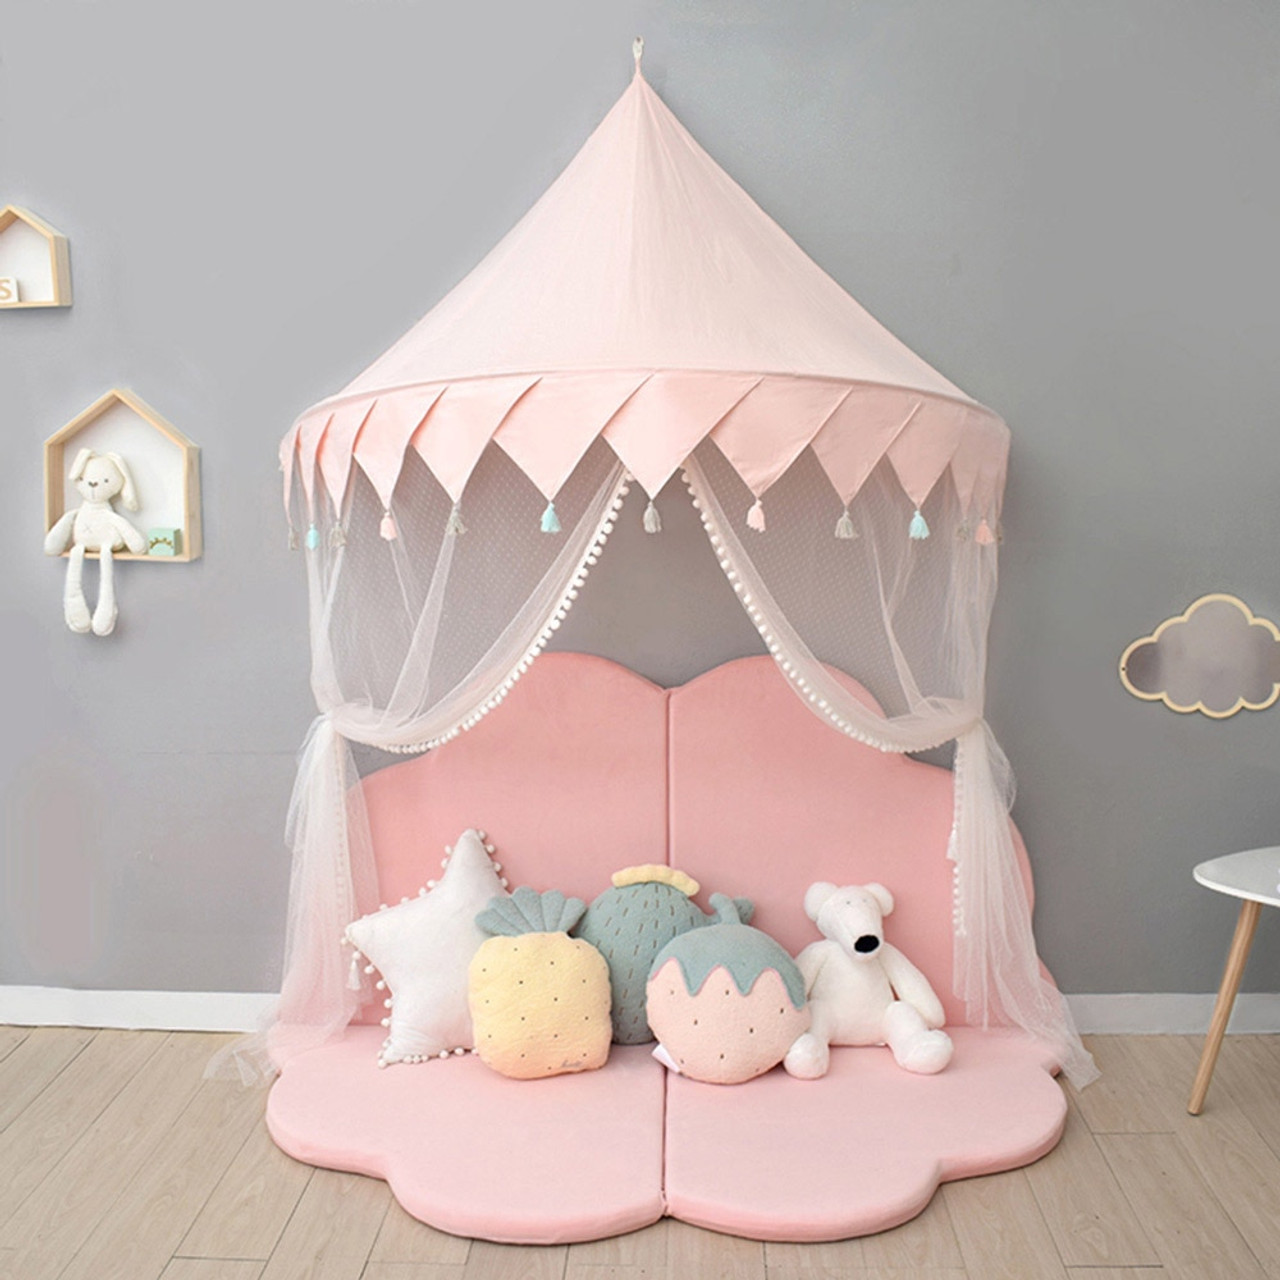 papasbox Bed Canopy for Kids Baby Bed,Kids or Adults,Mosquito Net for Bed,Dome Kids Indoor Outdoor Castle Play Tent Hanging House Decor Reading Nook Chiffon 